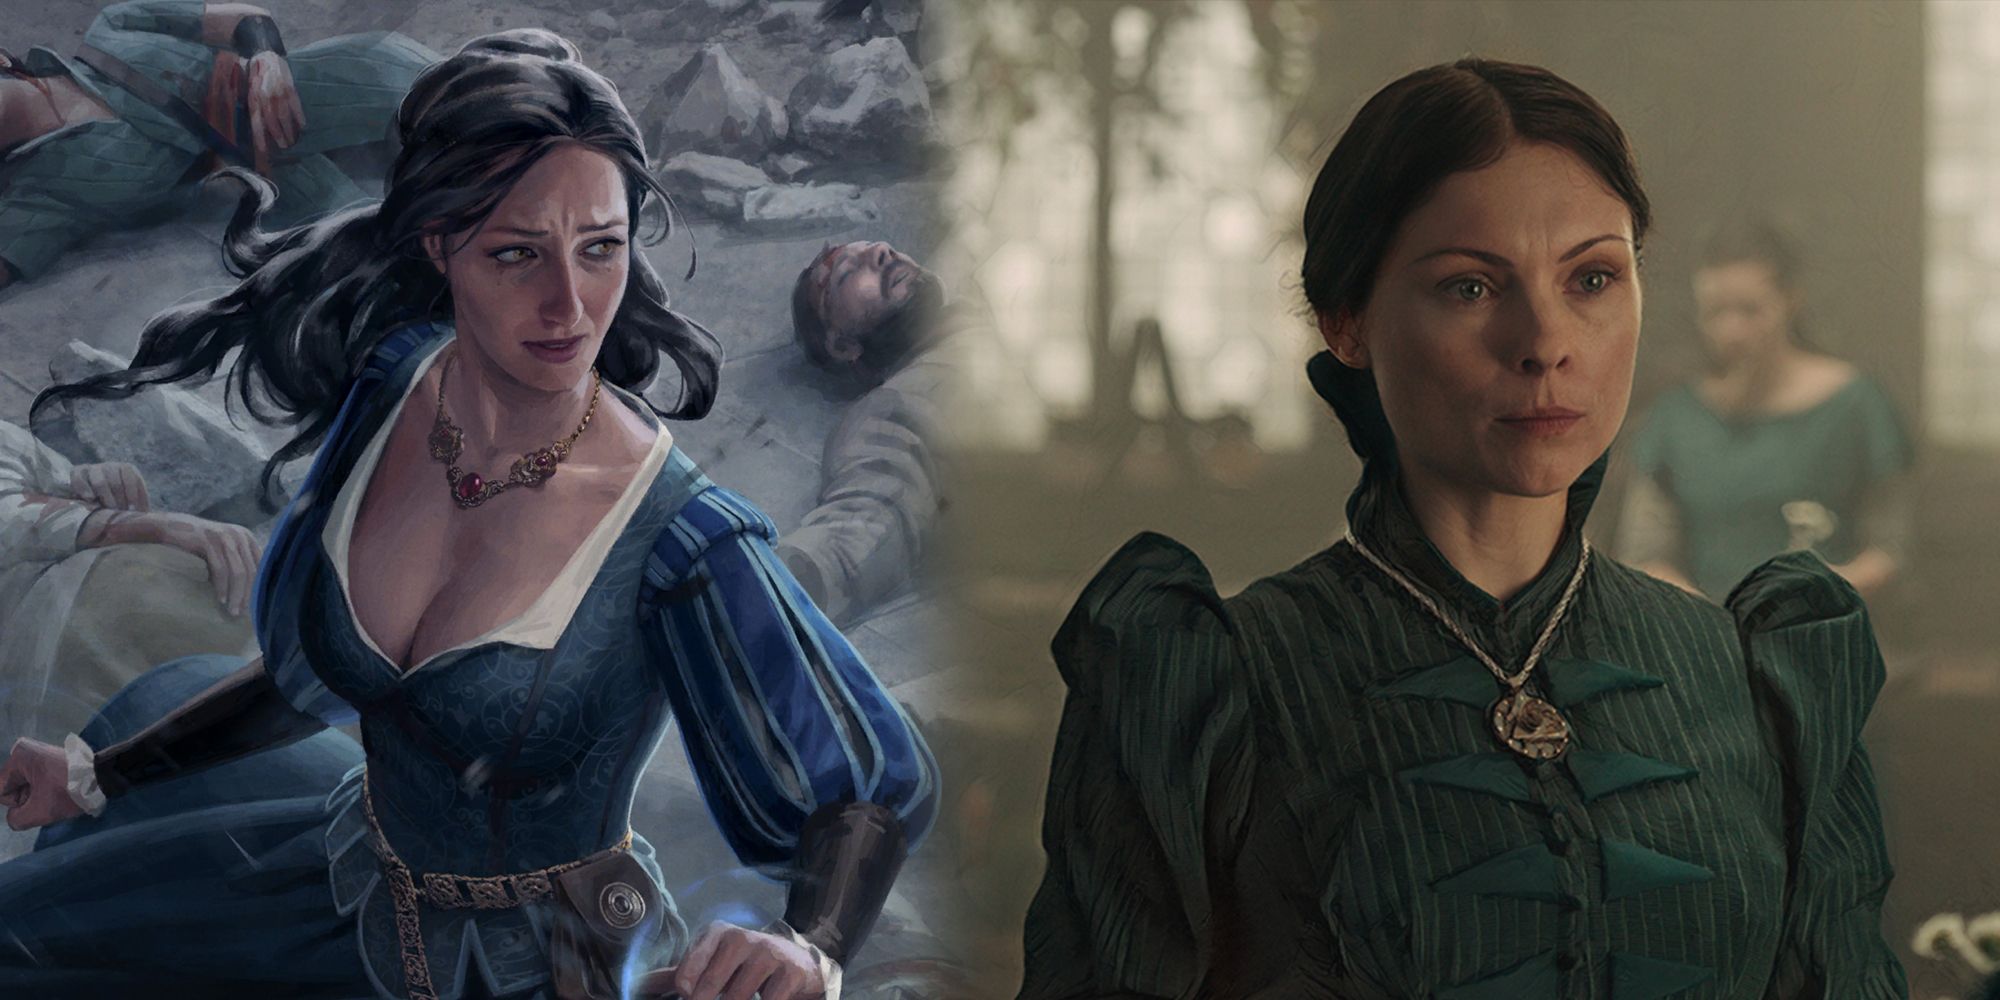 The Witcher - Tissaia Looking Distraught In Her Gwent Card Art Side By Side With Her Looking Dejected In The Netflix Adaptation